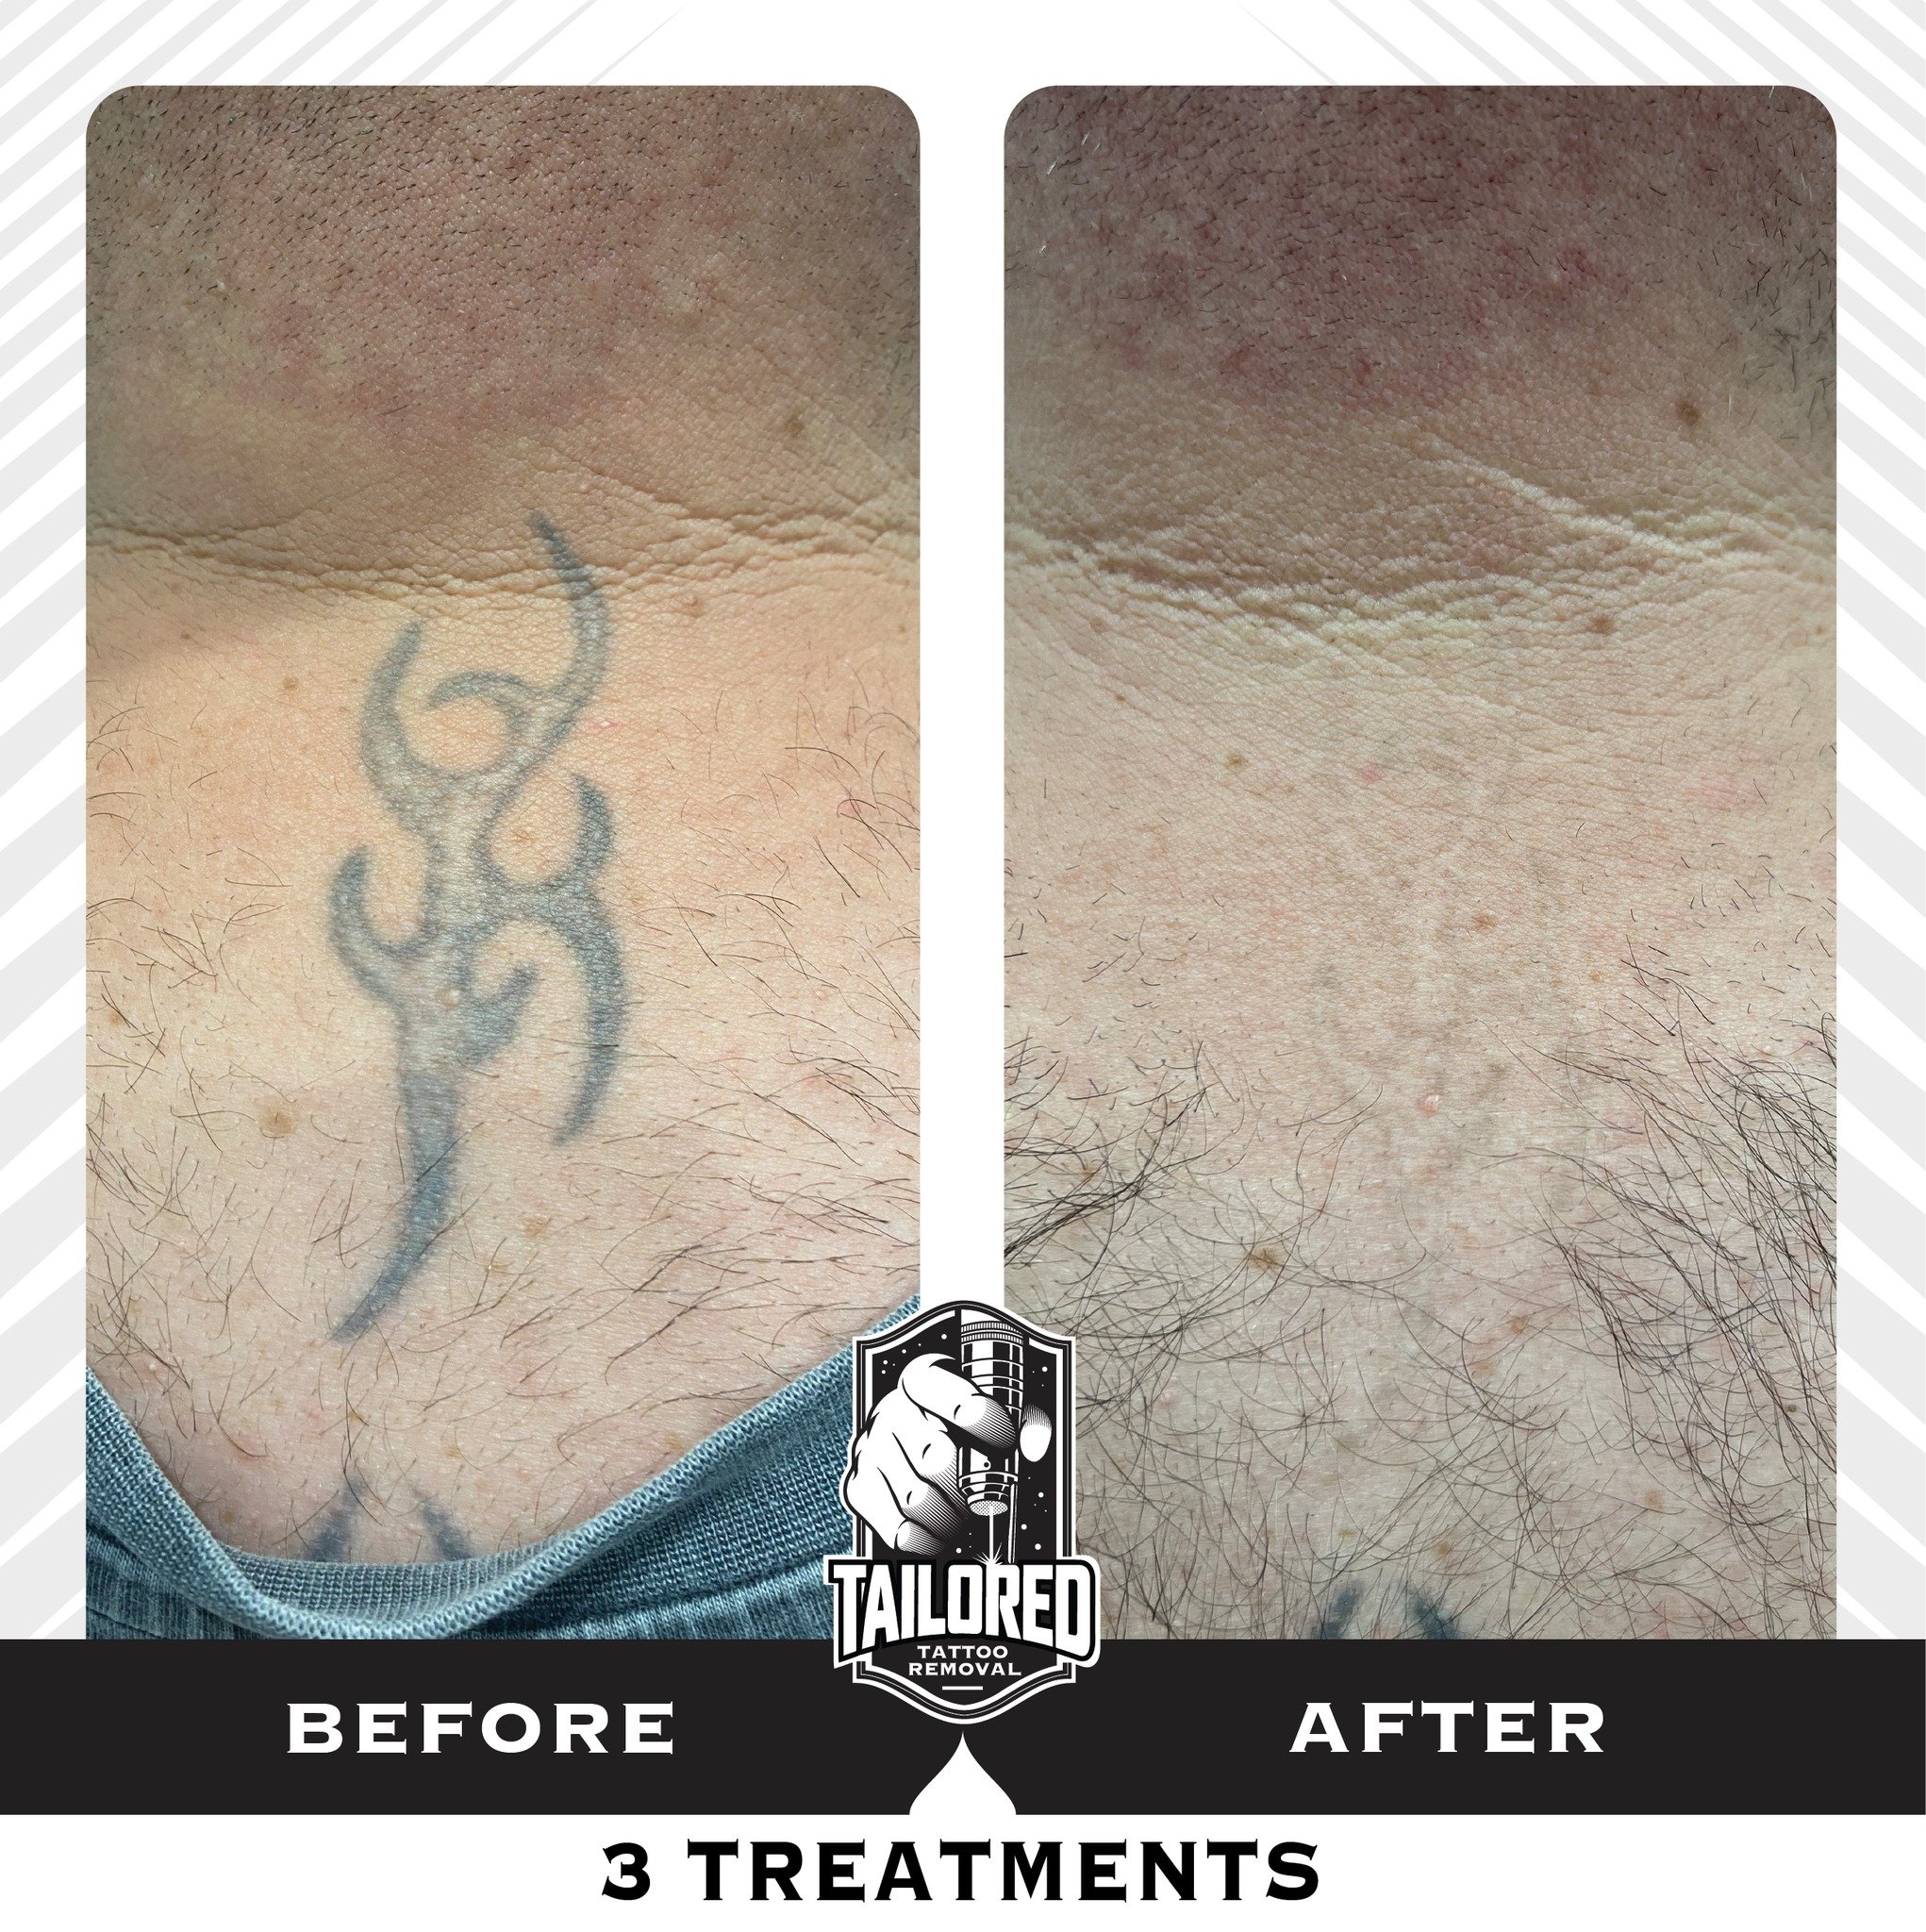 Our laser performs miracles! Don&rsquo;t live with a tattoo you no longer love. Start your tattoo removal journey with us @tailoredtattooremoval

Book in a FREE Consultation to find out more👇🏼

ᴄᴏɴᴛᴀᴄᴛ ᴜs ⚡️
📞 0413 488 789
📧 info@tailoredtattoore